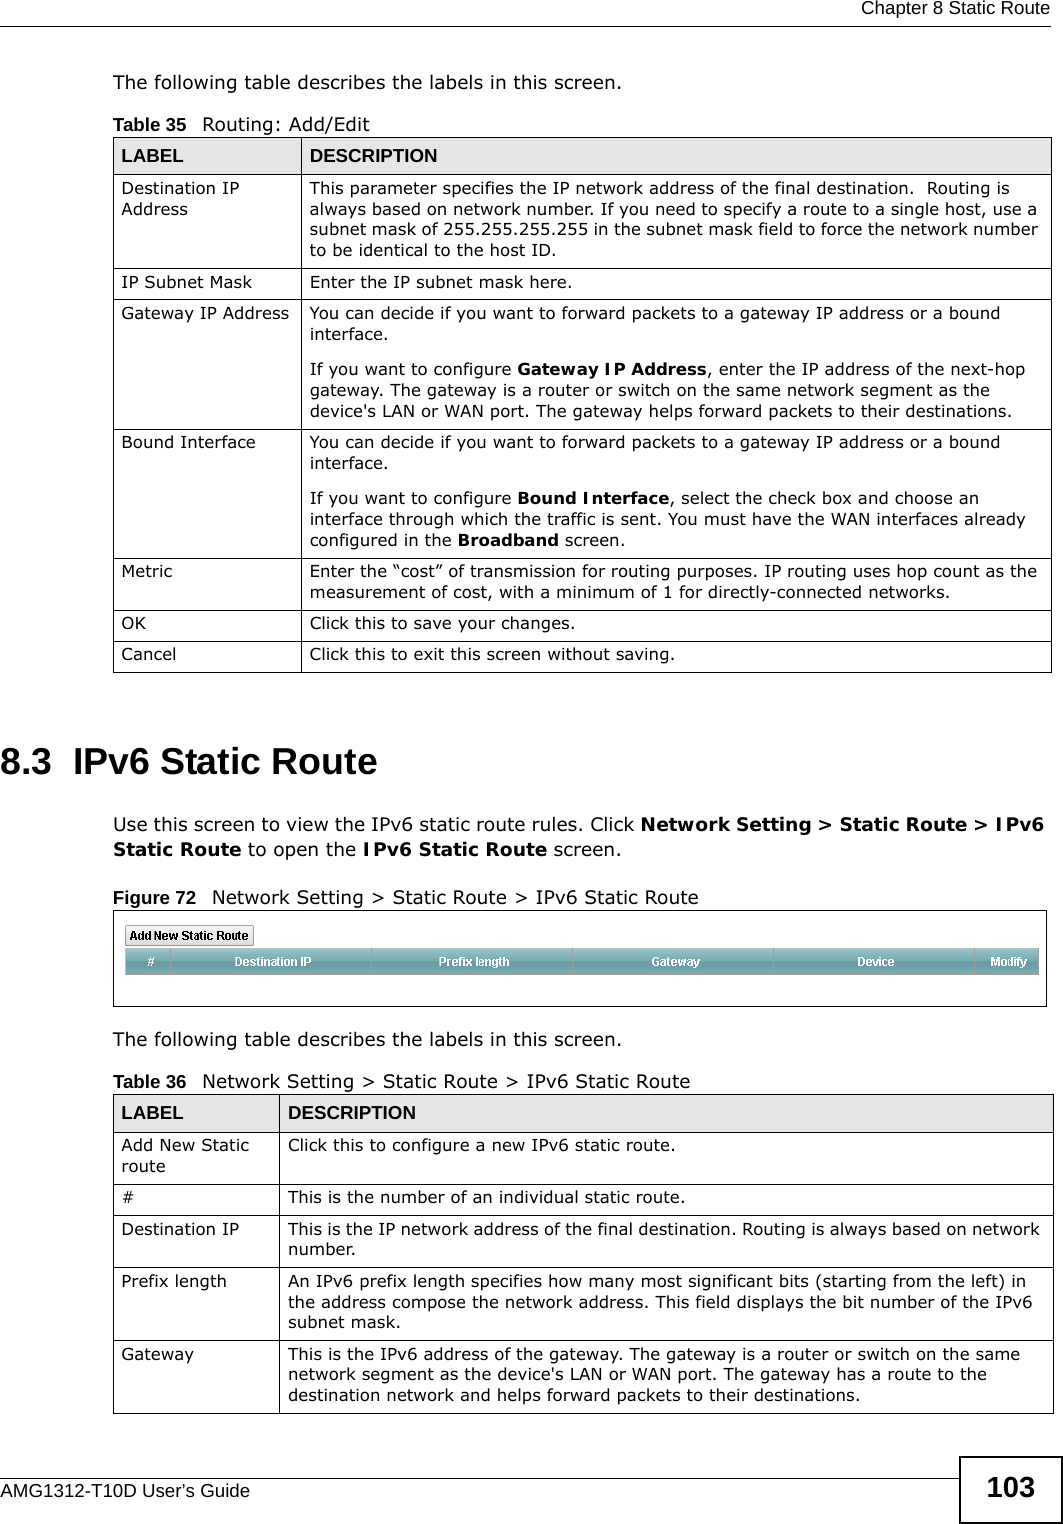  Chapter 8 Static RouteAMG1312-T10D User’s Guide 103The following table describes the labels in this screen. 8.3  IPv6 Static RouteUse this screen to view the IPv6 static route rules. Click Network Setting &gt; Static Route &gt; IPv6 Static Route to open the IPv6 Static Route screen.Figure 72   Network Setting &gt; Static Route &gt; IPv6 Static RouteThe following table describes the labels in this screen. Table 35   Routing: Add/EditLABEL DESCRIPTIONDestination IP AddressThis parameter specifies the IP network address of the final destination.  Routing is always based on network number. If you need to specify a route to a single host, use a subnet mask of 255.255.255.255 in the subnet mask field to force the network number to be identical to the host ID.IP Subnet Mask  Enter the IP subnet mask here.Gateway IP Address You can decide if you want to forward packets to a gateway IP address or a bound interface.If you want to configure Gateway IP Address, enter the IP address of the next-hop gateway. The gateway is a router or switch on the same network segment as the device&apos;s LAN or WAN port. The gateway helps forward packets to their destinations.Bound Interface You can decide if you want to forward packets to a gateway IP address or a bound interface.If you want to configure Bound Interface, select the check box and choose an interface through which the traffic is sent. You must have the WAN interfaces already configured in the Broadband screen.Metric Enter the “cost” of transmission for routing purposes. IP routing uses hop count as the measurement of cost, with a minimum of 1 for directly-connected networks.OK Click this to save your changes.Cancel Click this to exit this screen without saving.Table 36   Network Setting &gt; Static Route &gt; IPv6 Static RouteLABEL DESCRIPTIONAdd New Static routeClick this to configure a new IPv6 static route.# This is the number of an individual static route.Destination IP This is the IP network address of the final destination. Routing is always based on network number. Prefix length An IPv6 prefix length specifies how many most significant bits (starting from the left) in the address compose the network address. This field displays the bit number of the IPv6 subnet mask.Gateway This is the IPv6 address of the gateway. The gateway is a router or switch on the same network segment as the device&apos;s LAN or WAN port. The gateway has a route to the destination network and helps forward packets to their destinations.